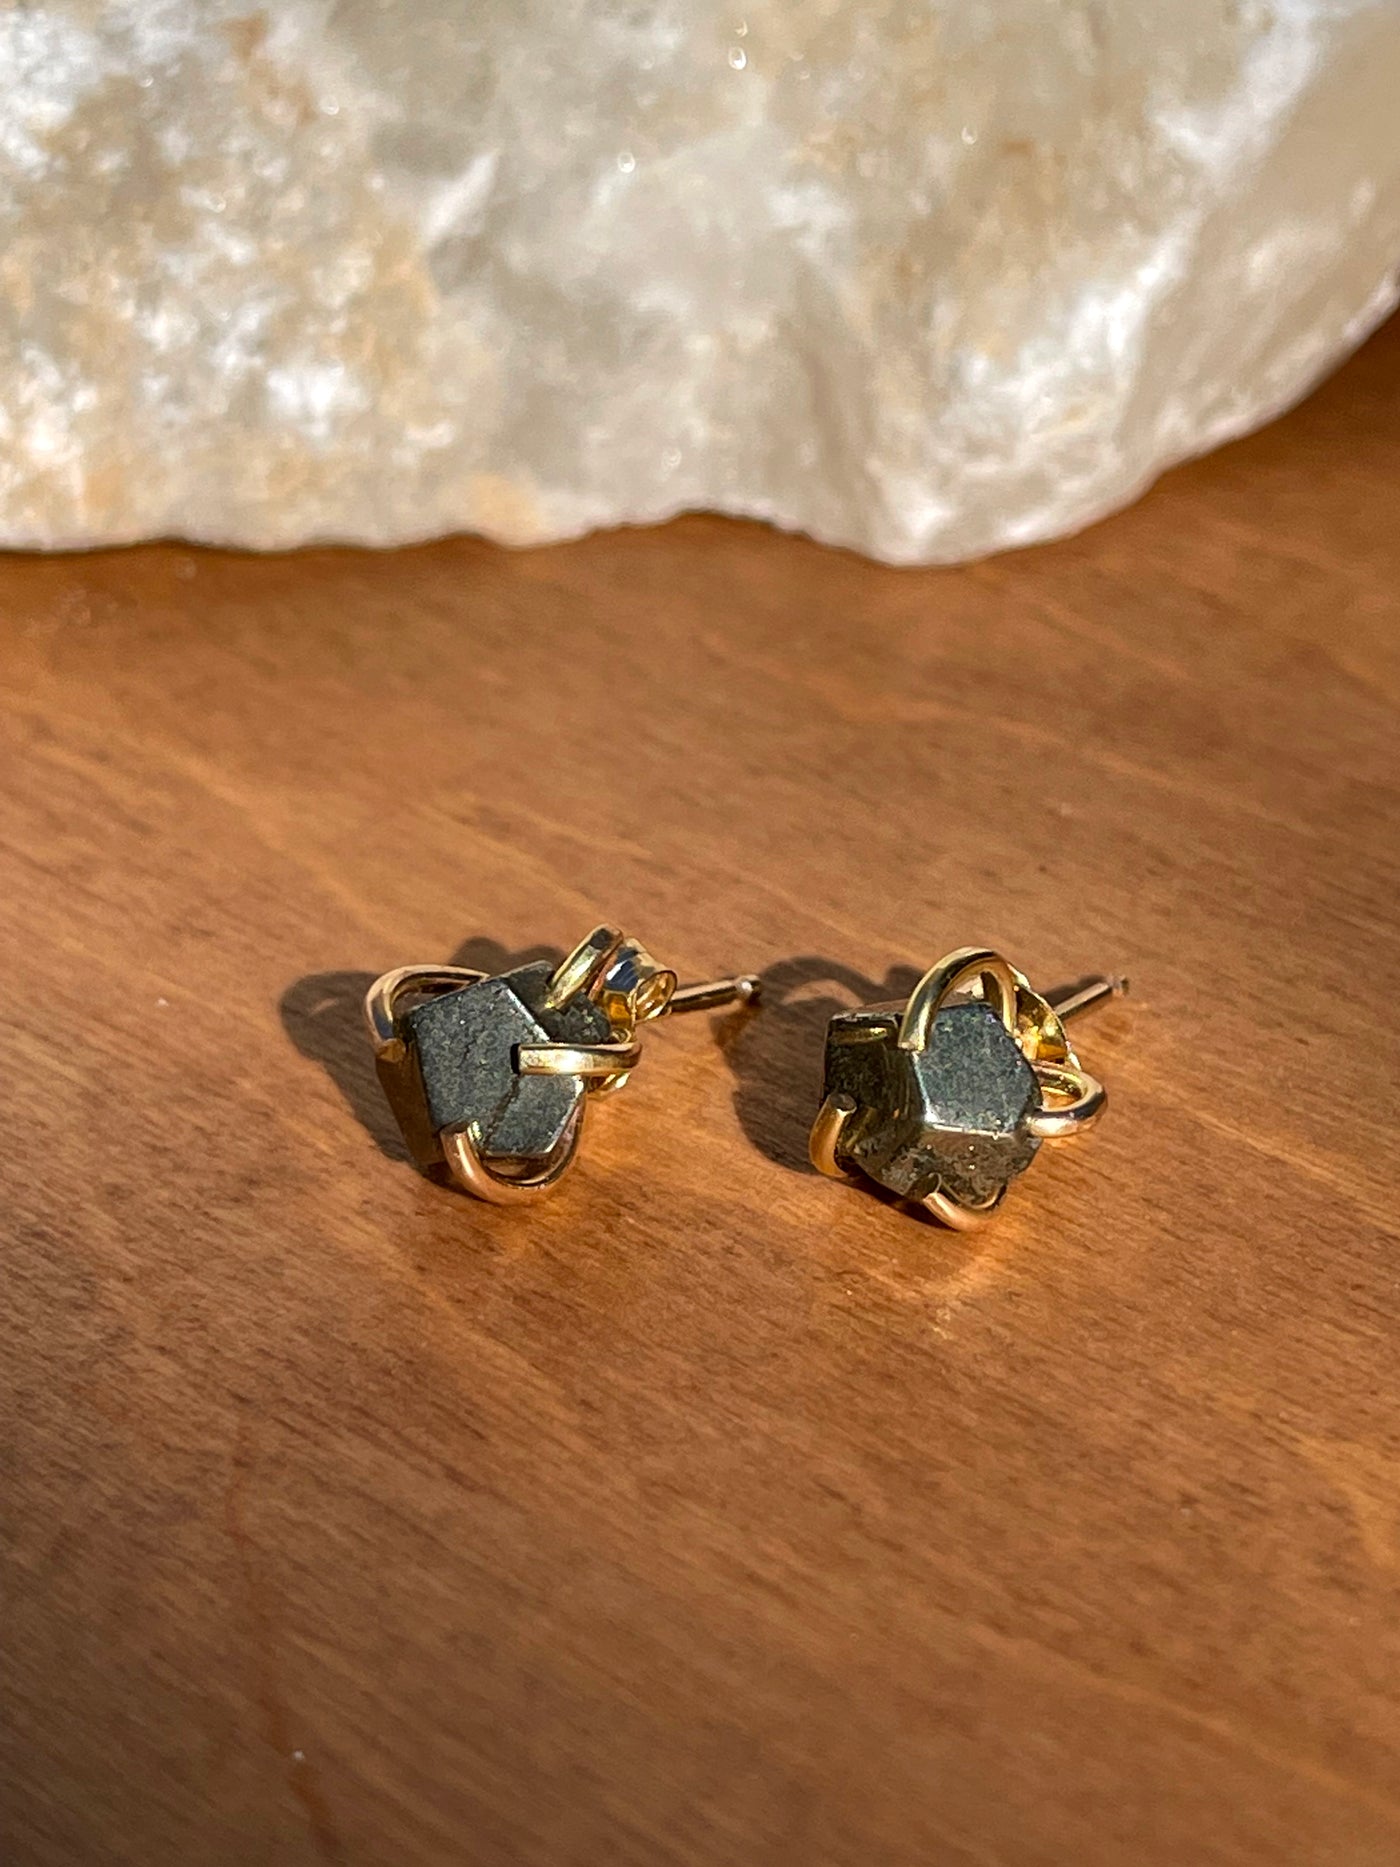 Pyrite Gold Prong Stud Earrings set in 5 handmade 14k yellow gold filled prongs.